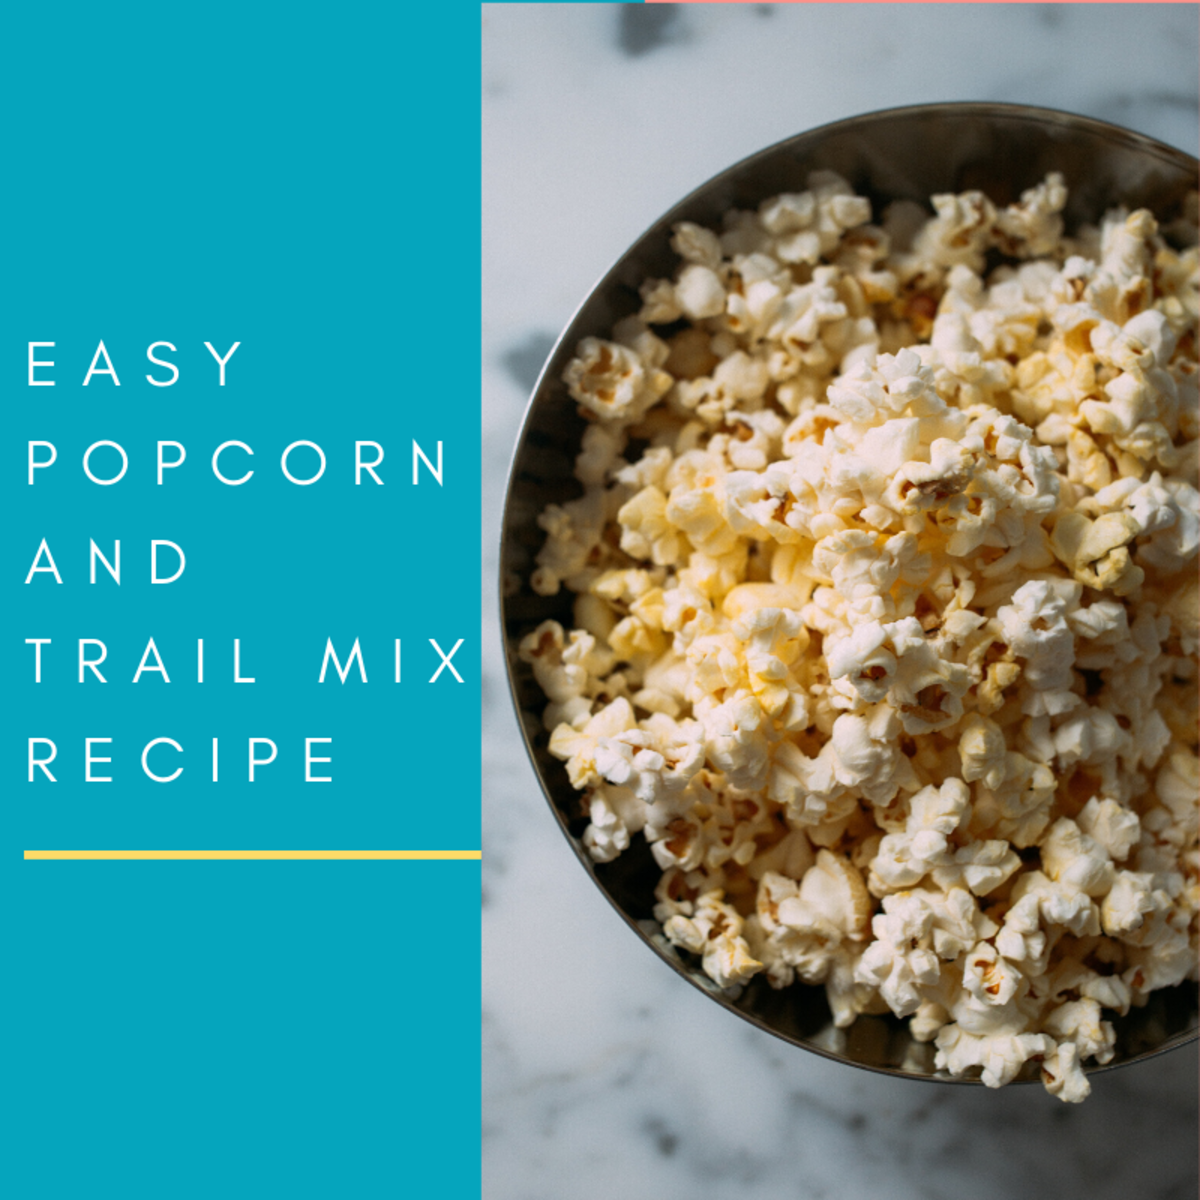 5 Quick and Easy Popcorn Snack and Trail Mix Recipes